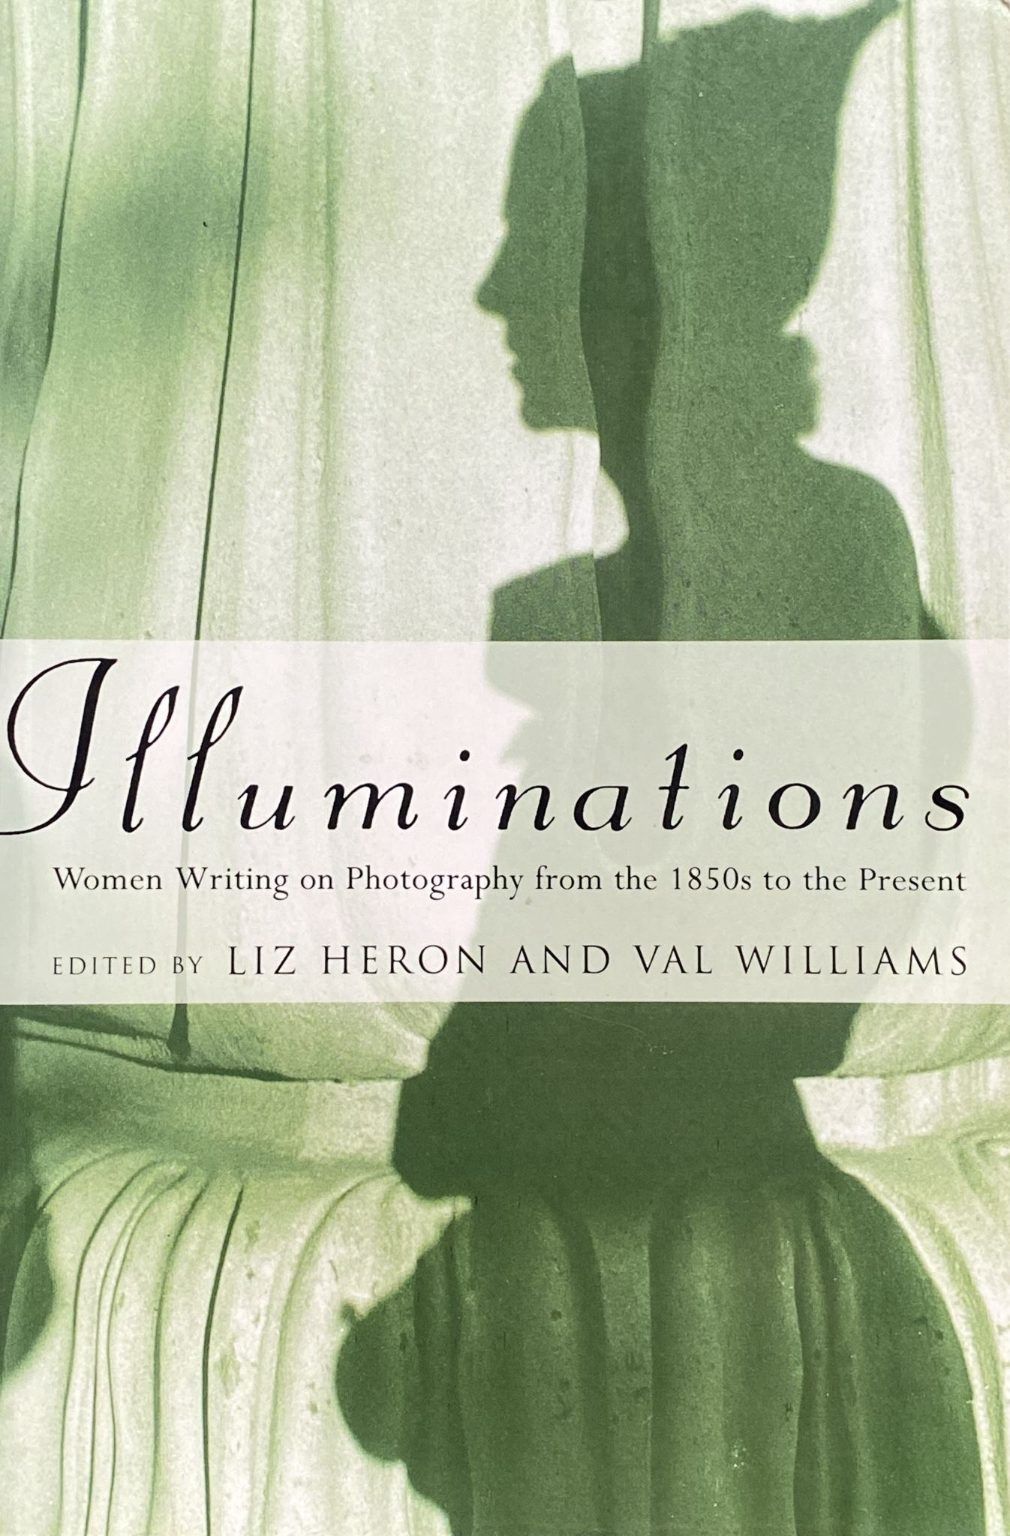 ILLUMINATIONS: Women Writing on Photography from the 1850's to the Present